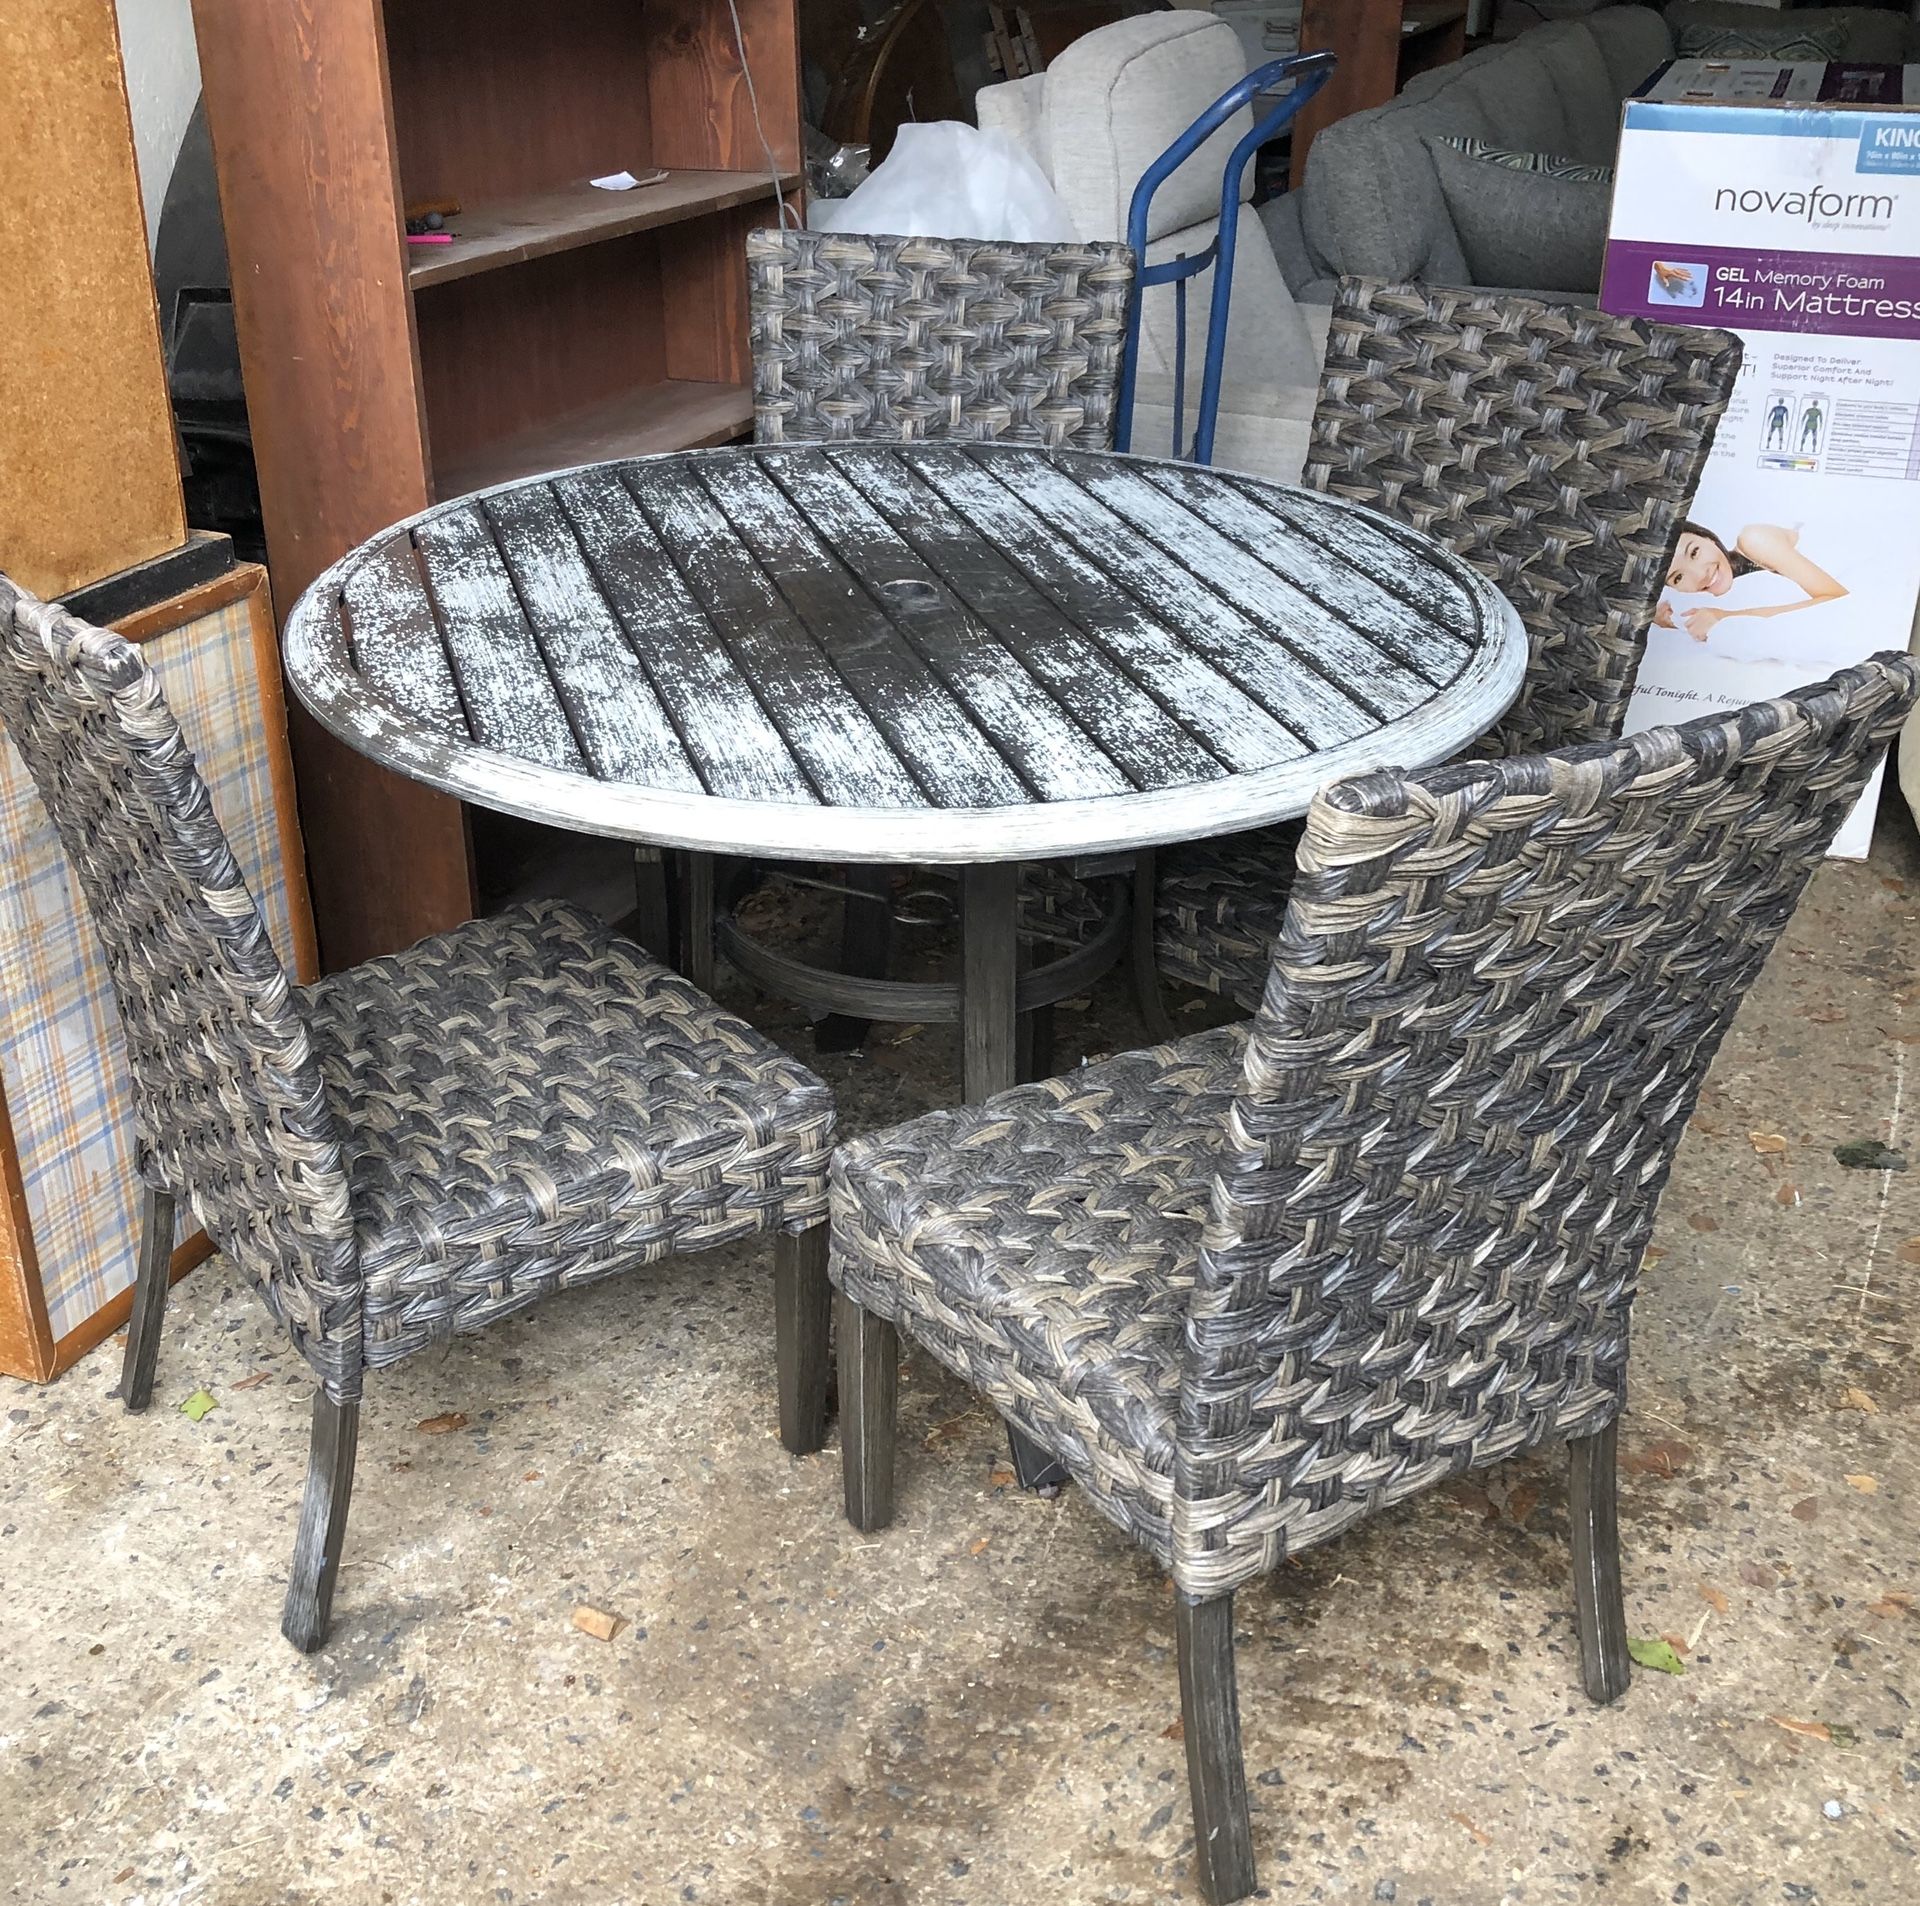 NEW NOT USED Outdoor Woodard 5 piece metal woven dining set